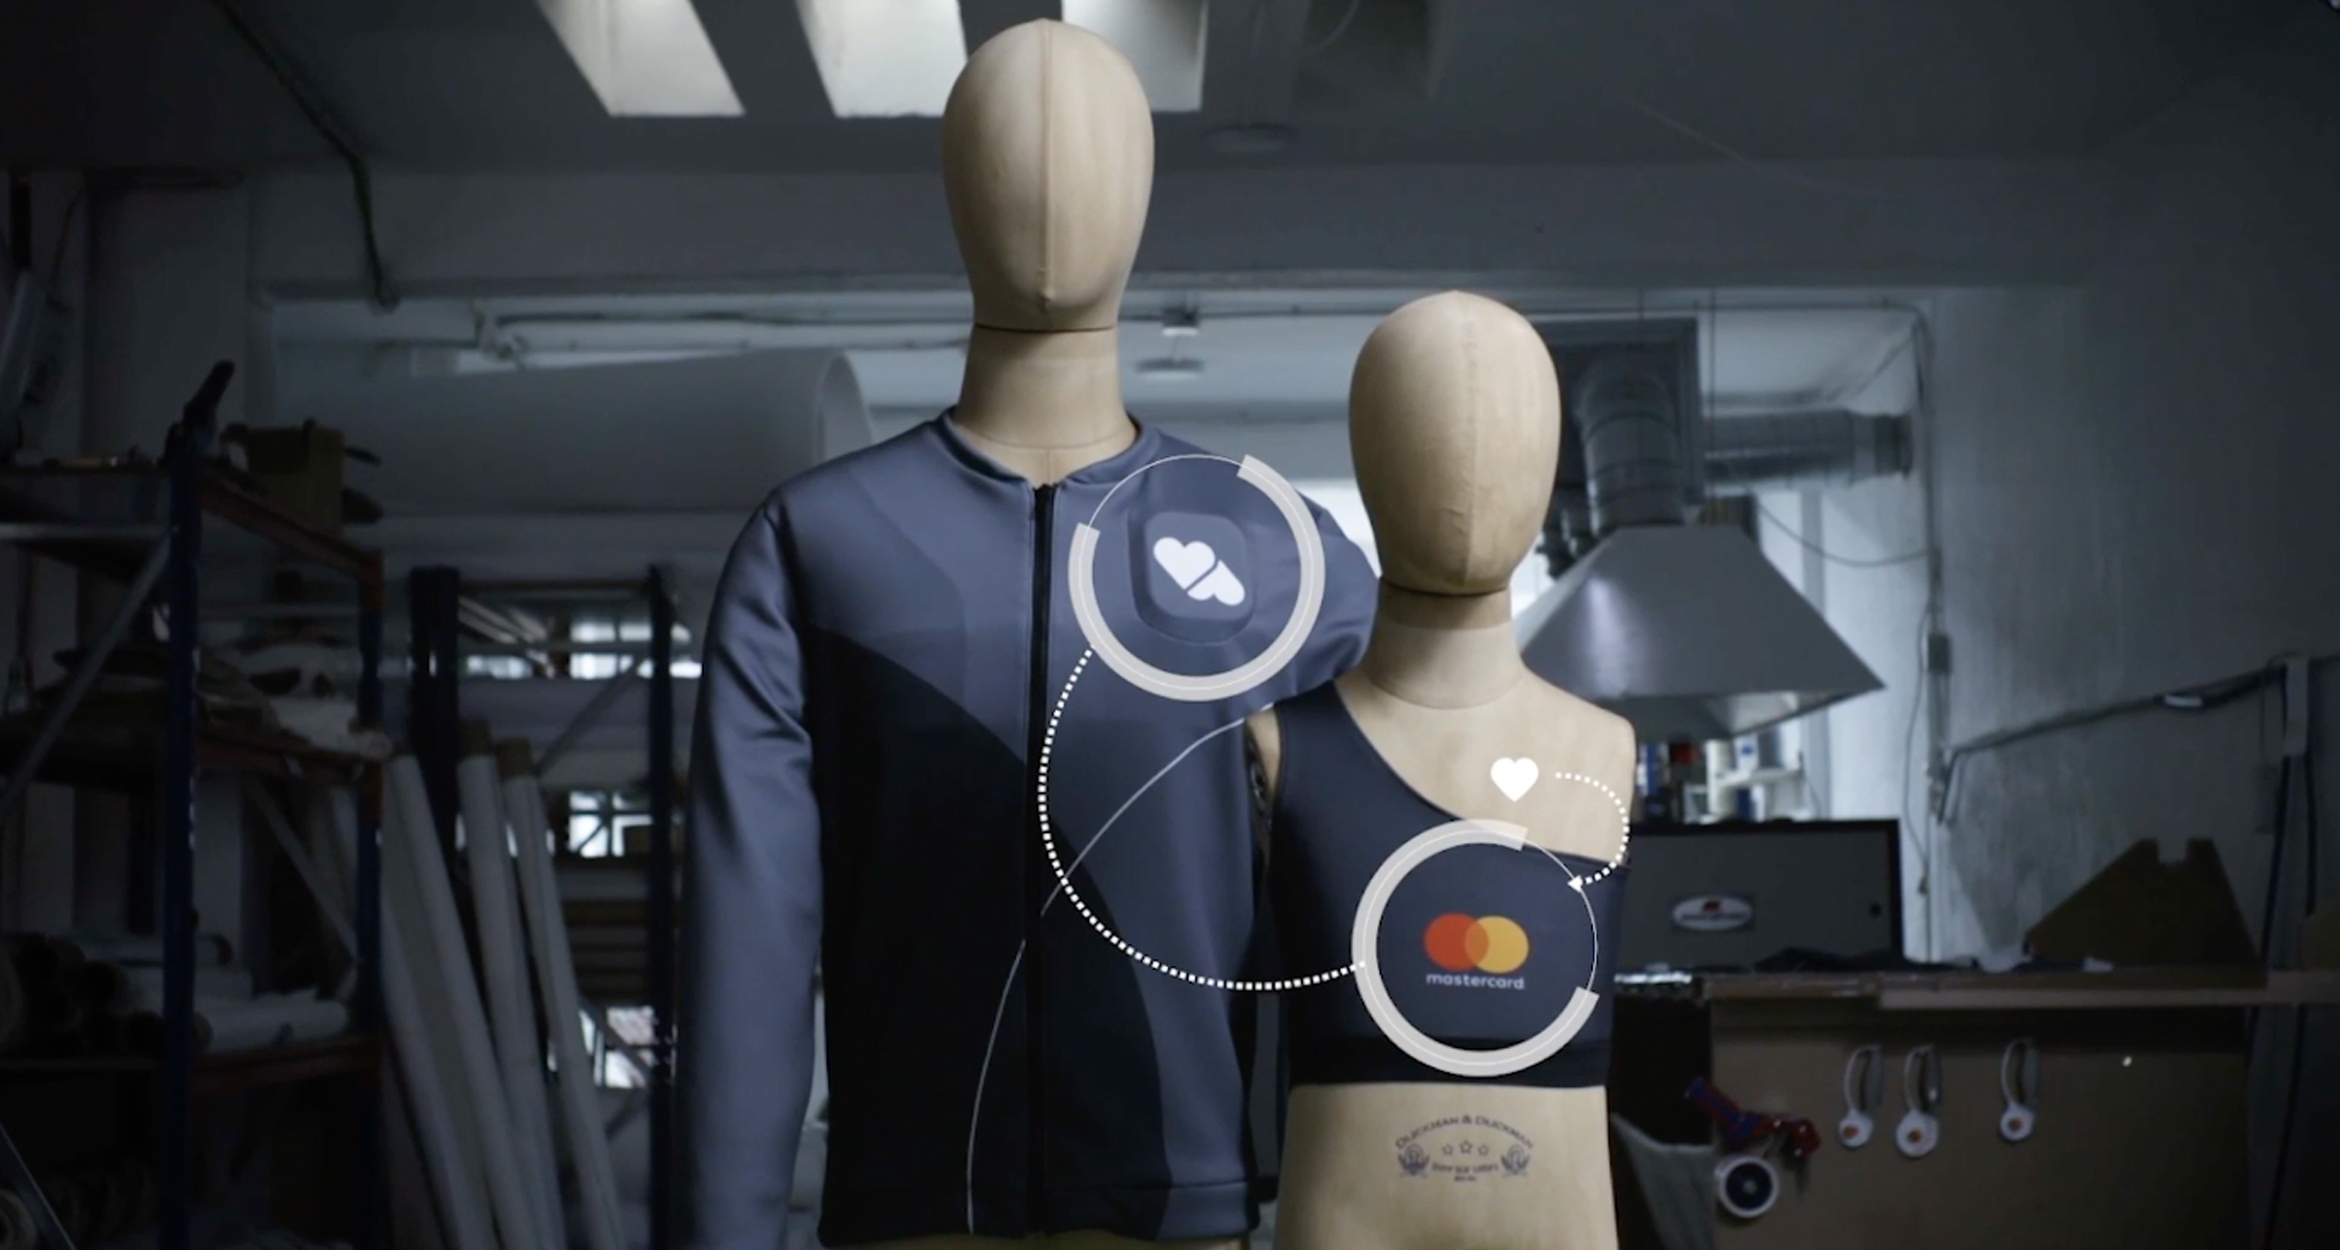 Kit Beats football jerseys on mannequins with illustrations showing how they connect 